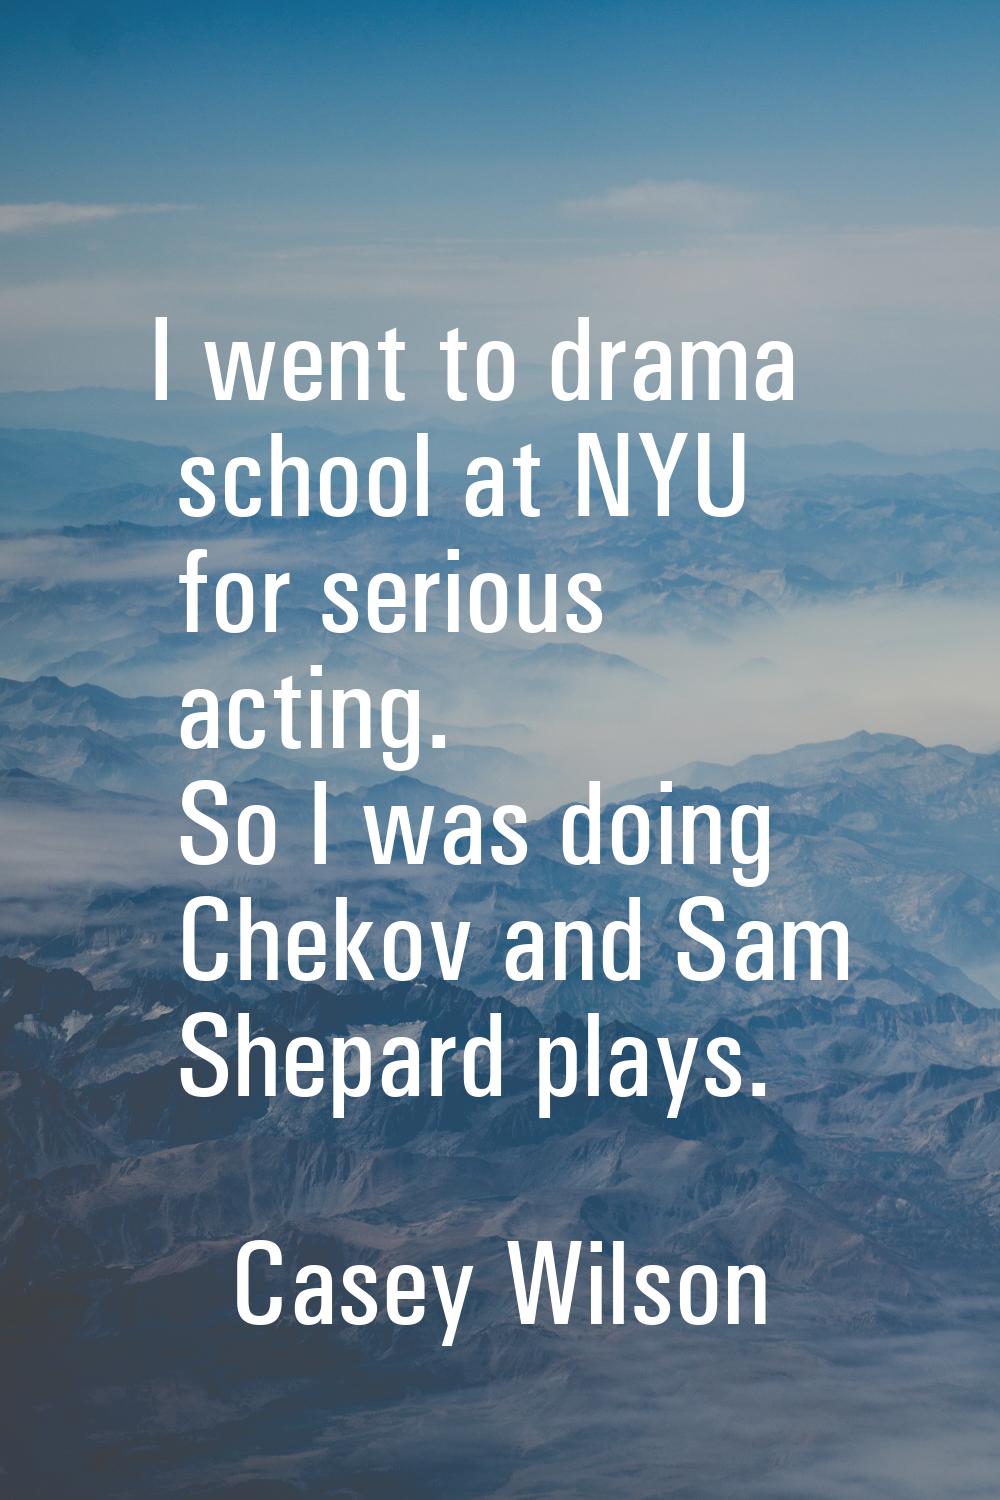 I went to drama school at NYU for serious acting. So I was doing Chekov and Sam Shepard plays.